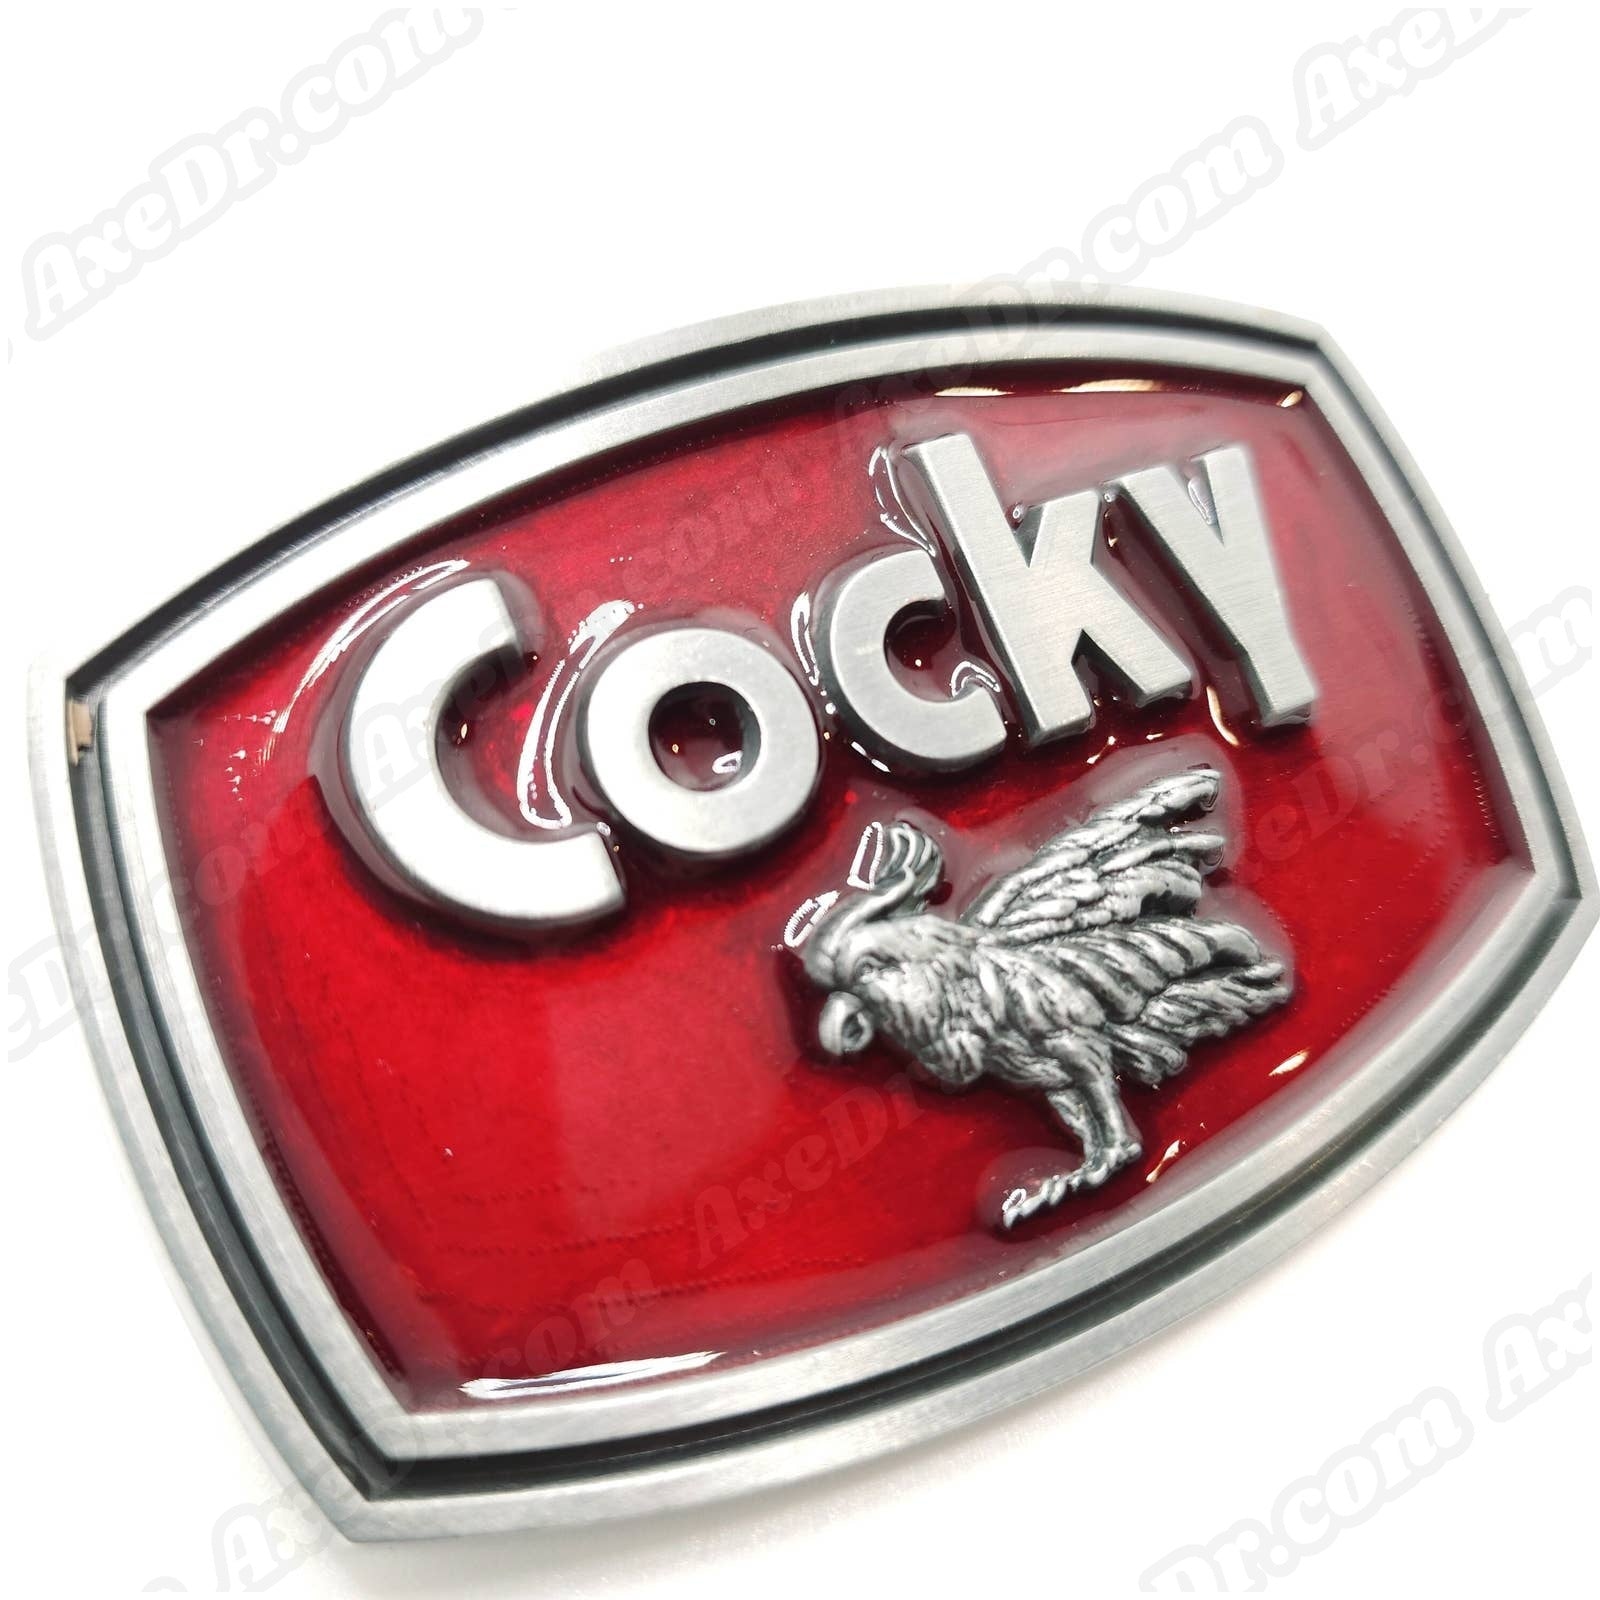 Cocky Belt Buckle with Genuine Leather Belt shop.AxeDr.com Belt Buckle, Belt with Buckle, Bones, Buckles with Belt, Cocky, Funny, Funny Belt Buckle, Gag Gift, 